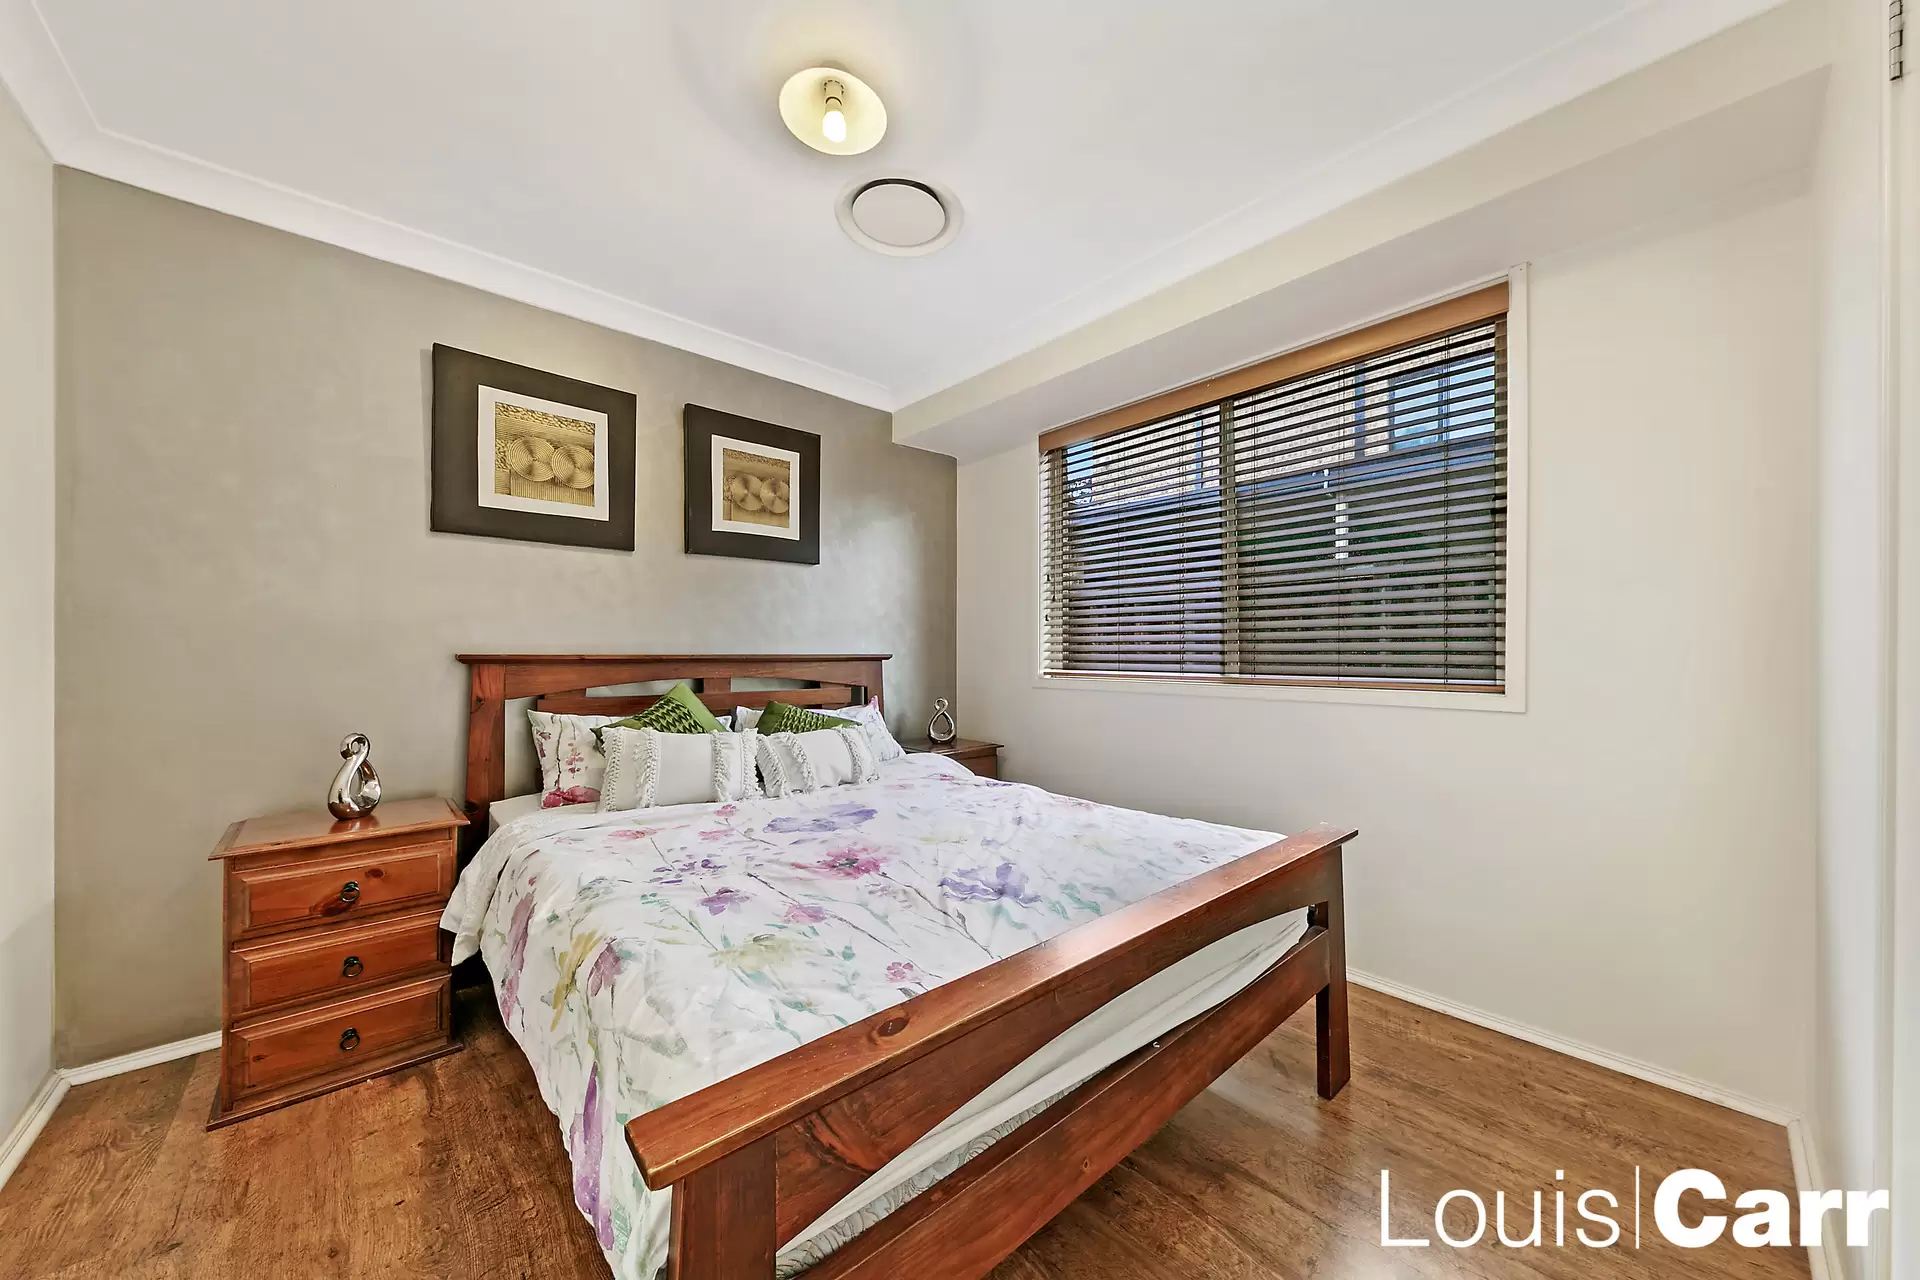 Photo #10: 78 Perisher Road, Beaumont Hills - Leased by Louis Carr Real Estate